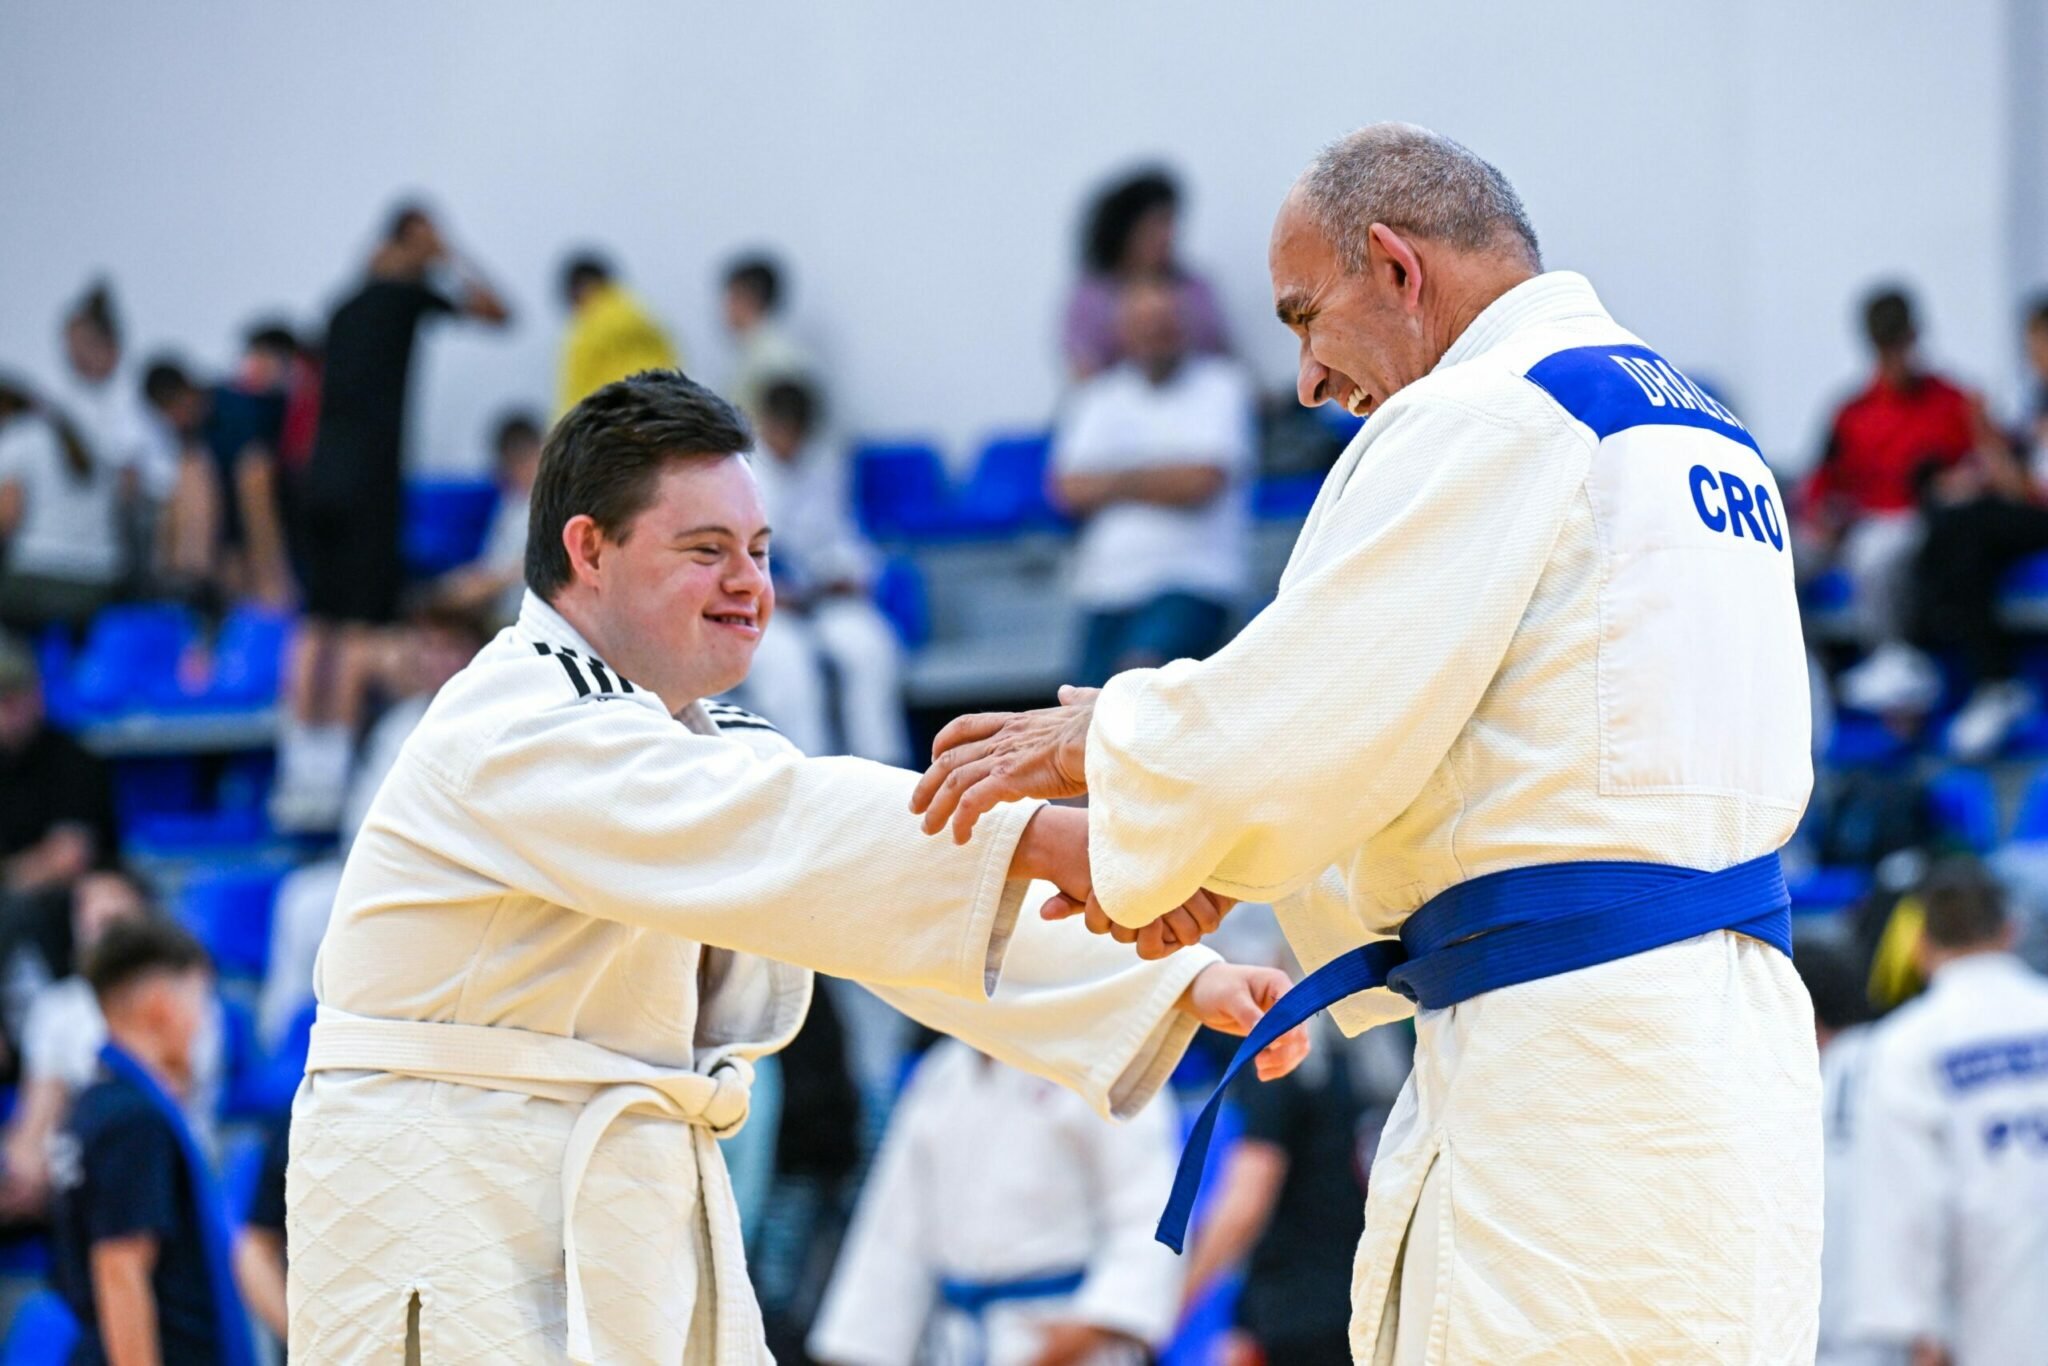 ADAPTED JUDO IN WALES